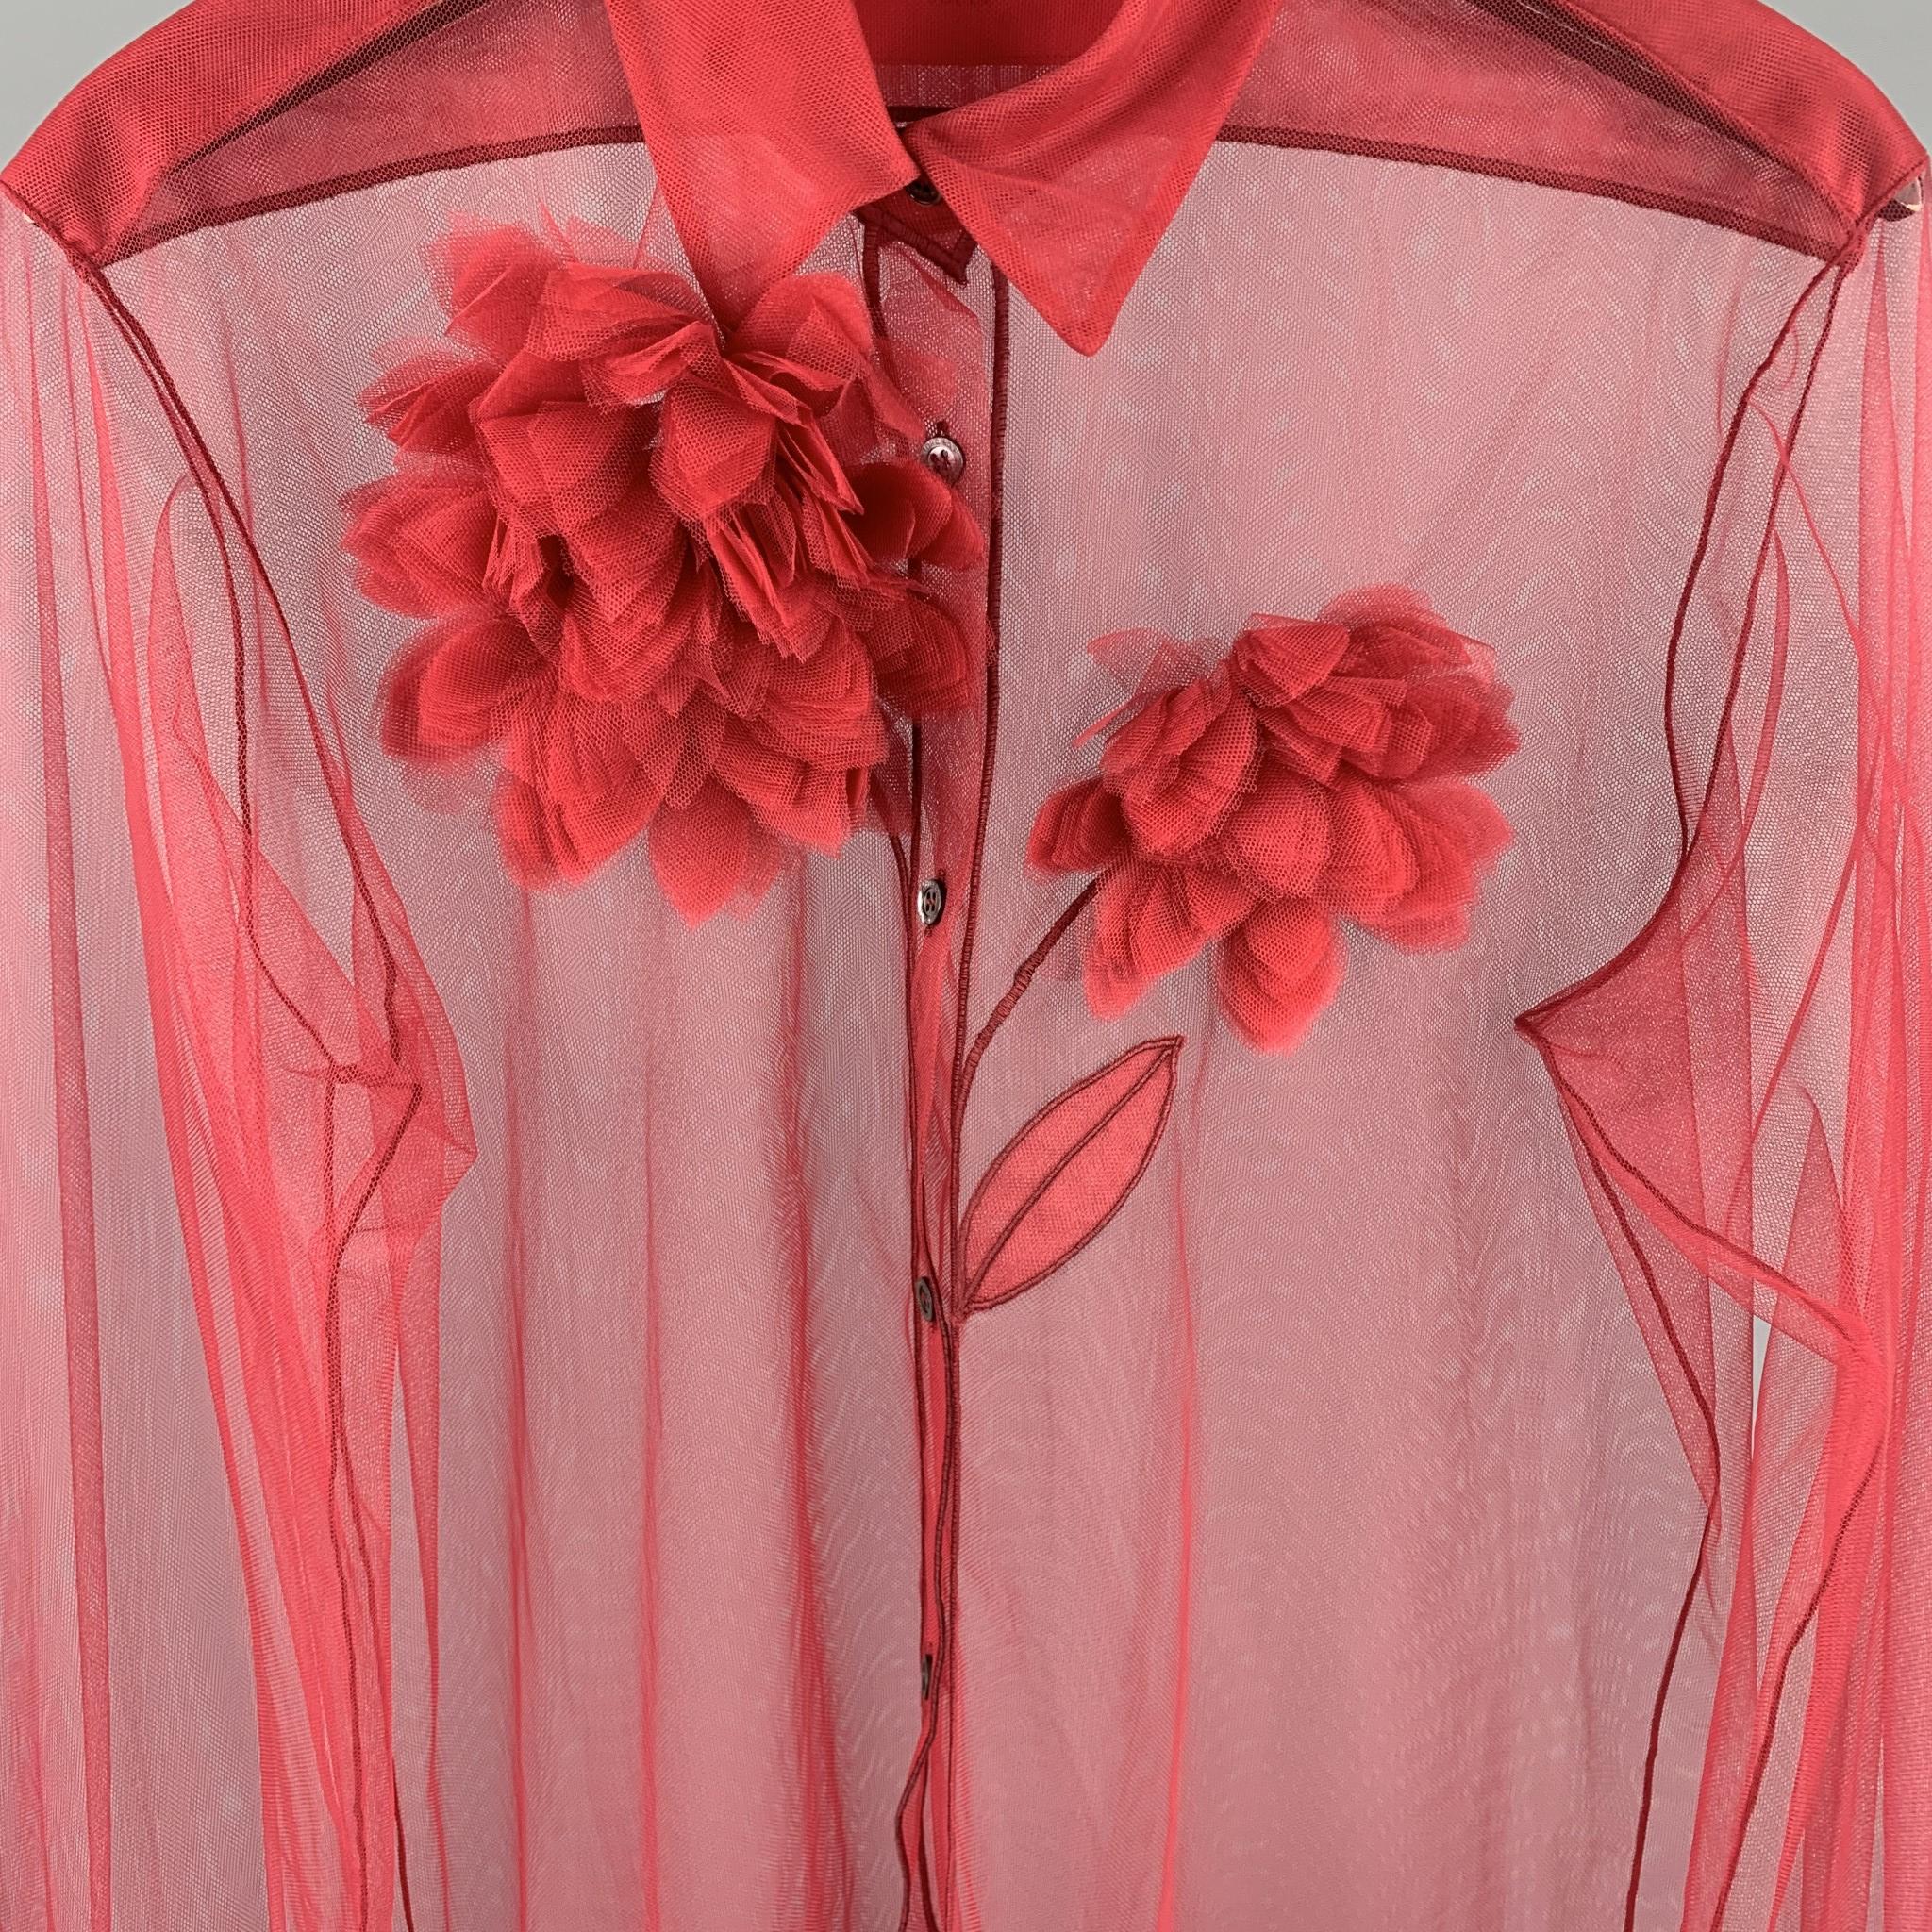 VIKTOR & ROLF cowboy shirt comes in red tulle with burgundy embroidery and tulle appliques. Made in Netherlands.

New wih Tags. 
Marked: M

Measurements:

Shoulder: 17 in.
Chest: 44 in.
Sleeve: 28 in.
Length: 30 in.